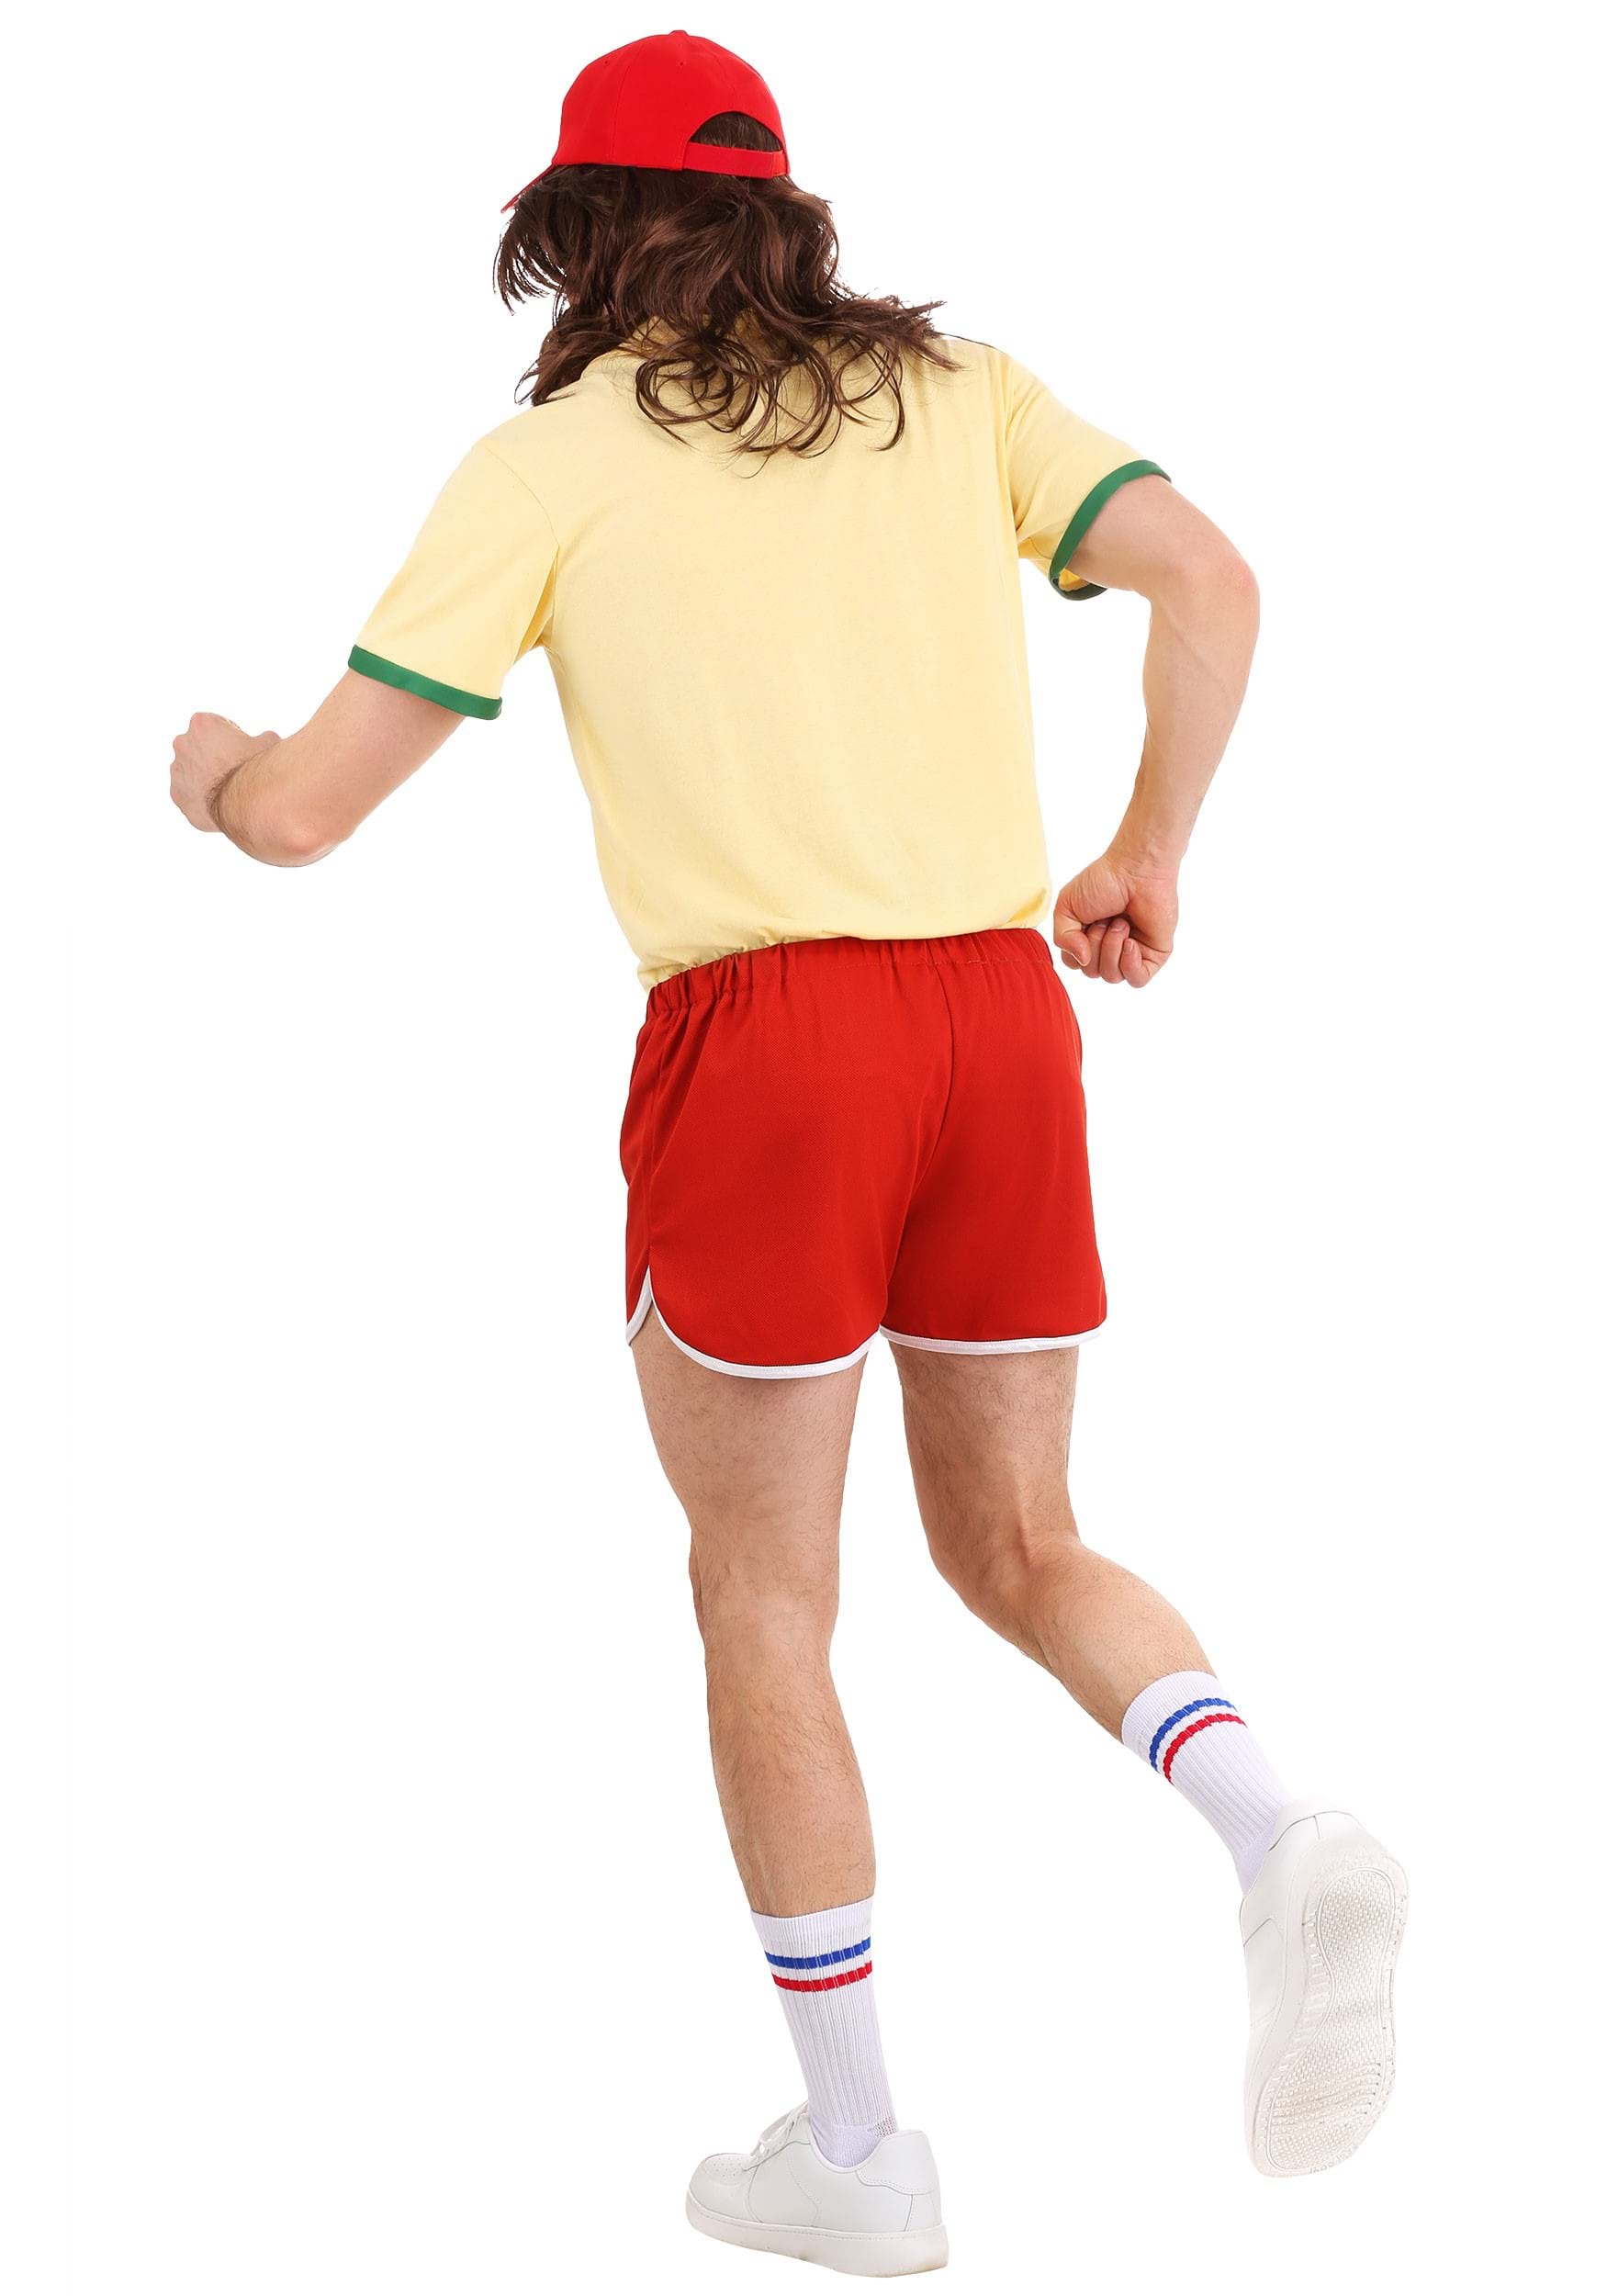 Forrest Gump Running Costume , Movie Character Costume